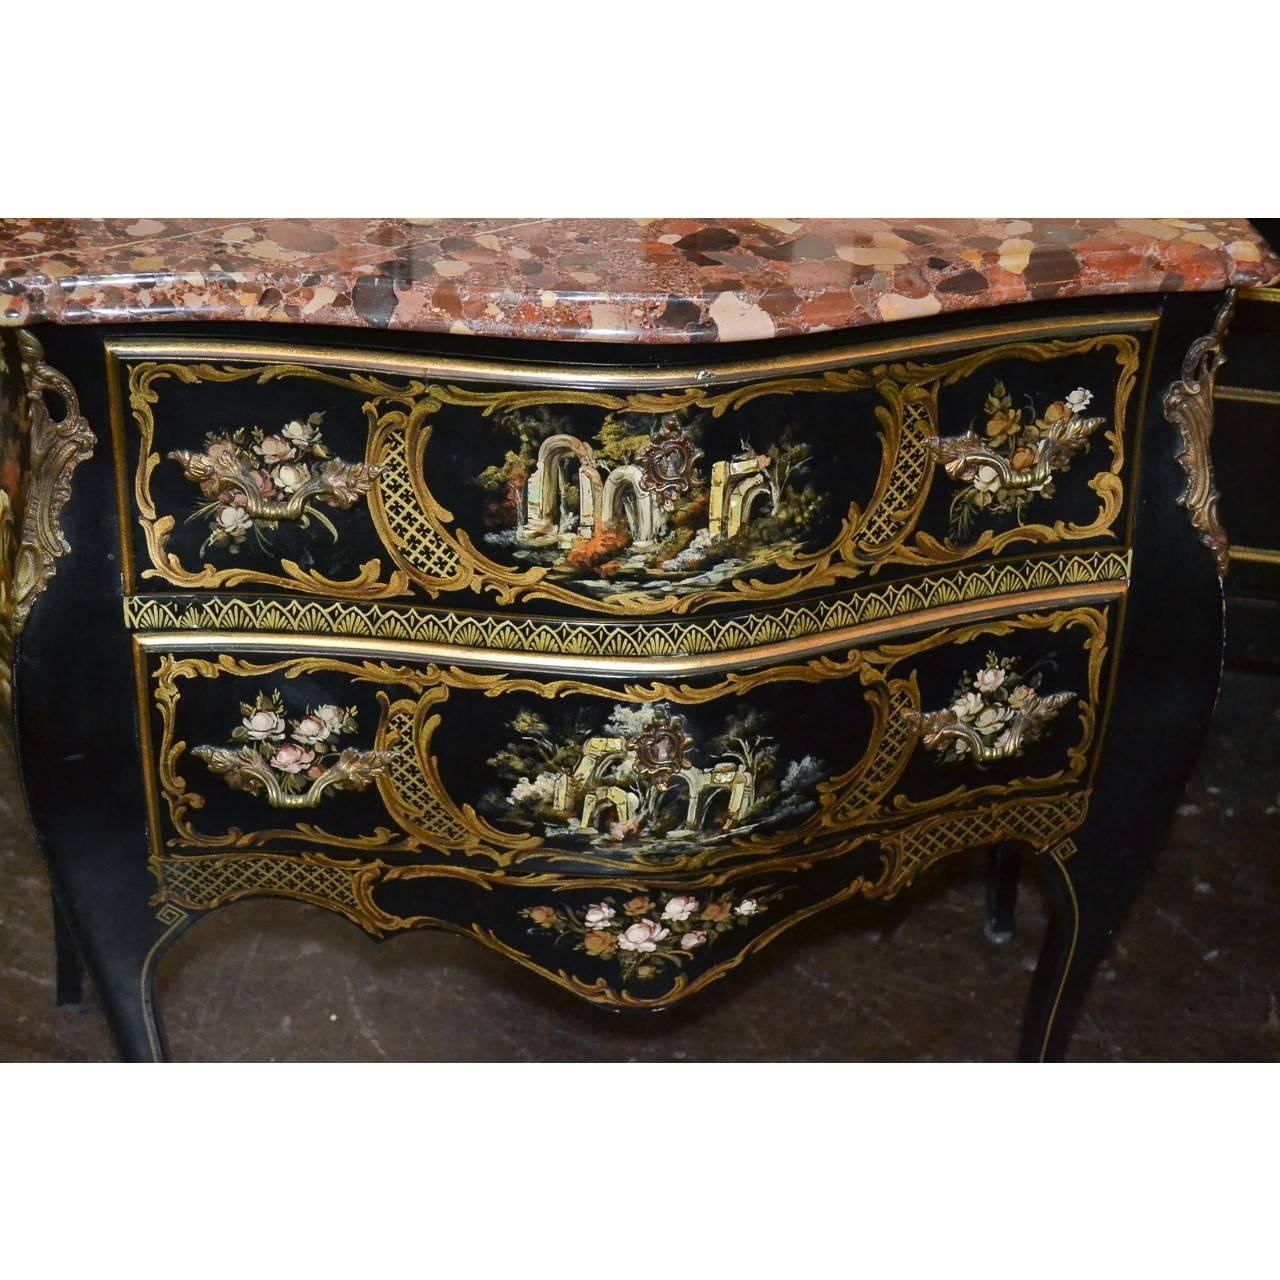 Fabulous chinoiserie commode with a stunning rouge marble top.
Black lacquered, circa 1950. Made in Italy.
Measures: 32 inches wide x 29 inches height x 16 inches deep.